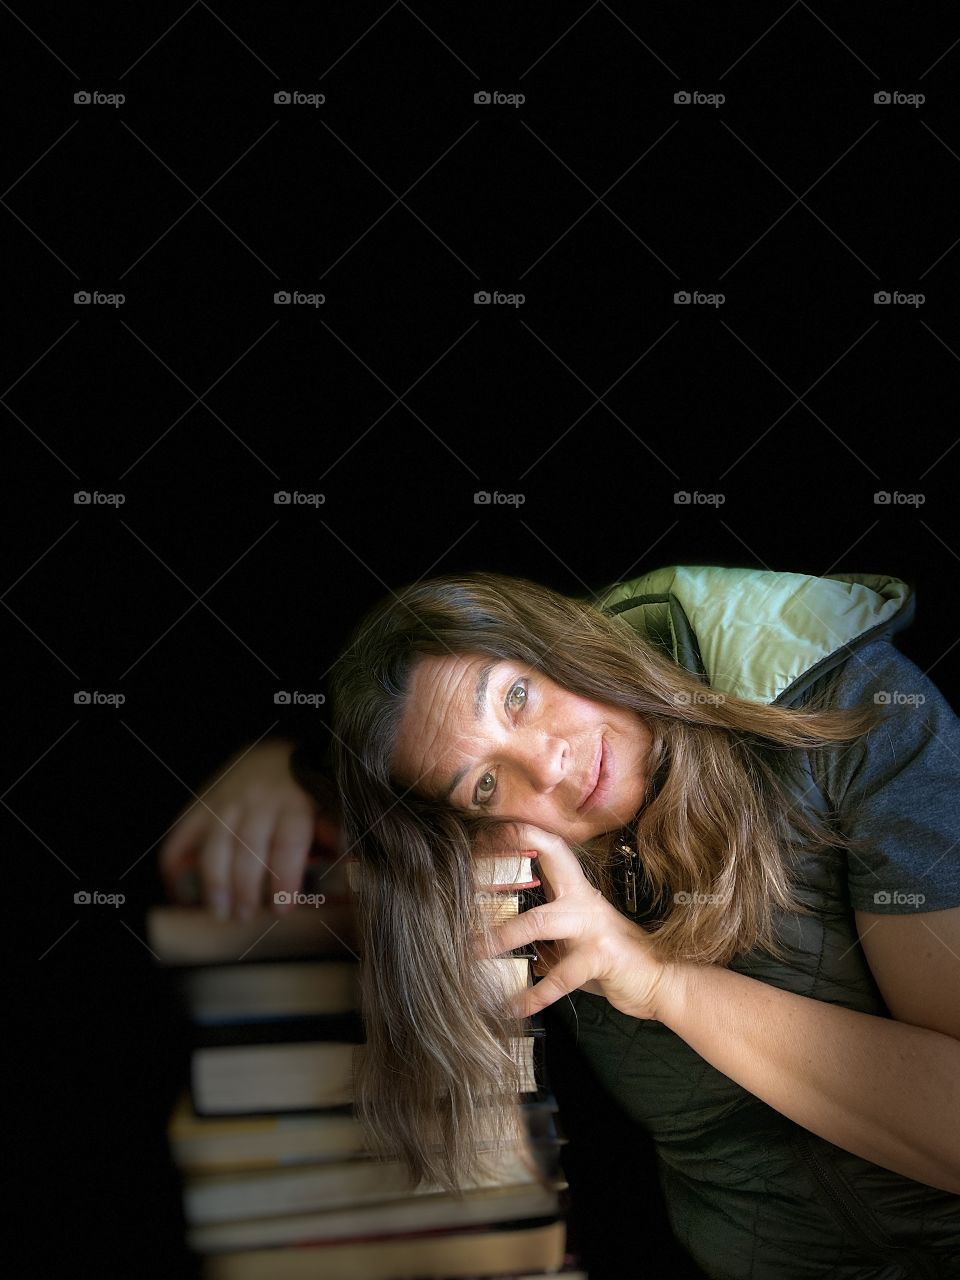 iPhone portrait - woman with book stack.